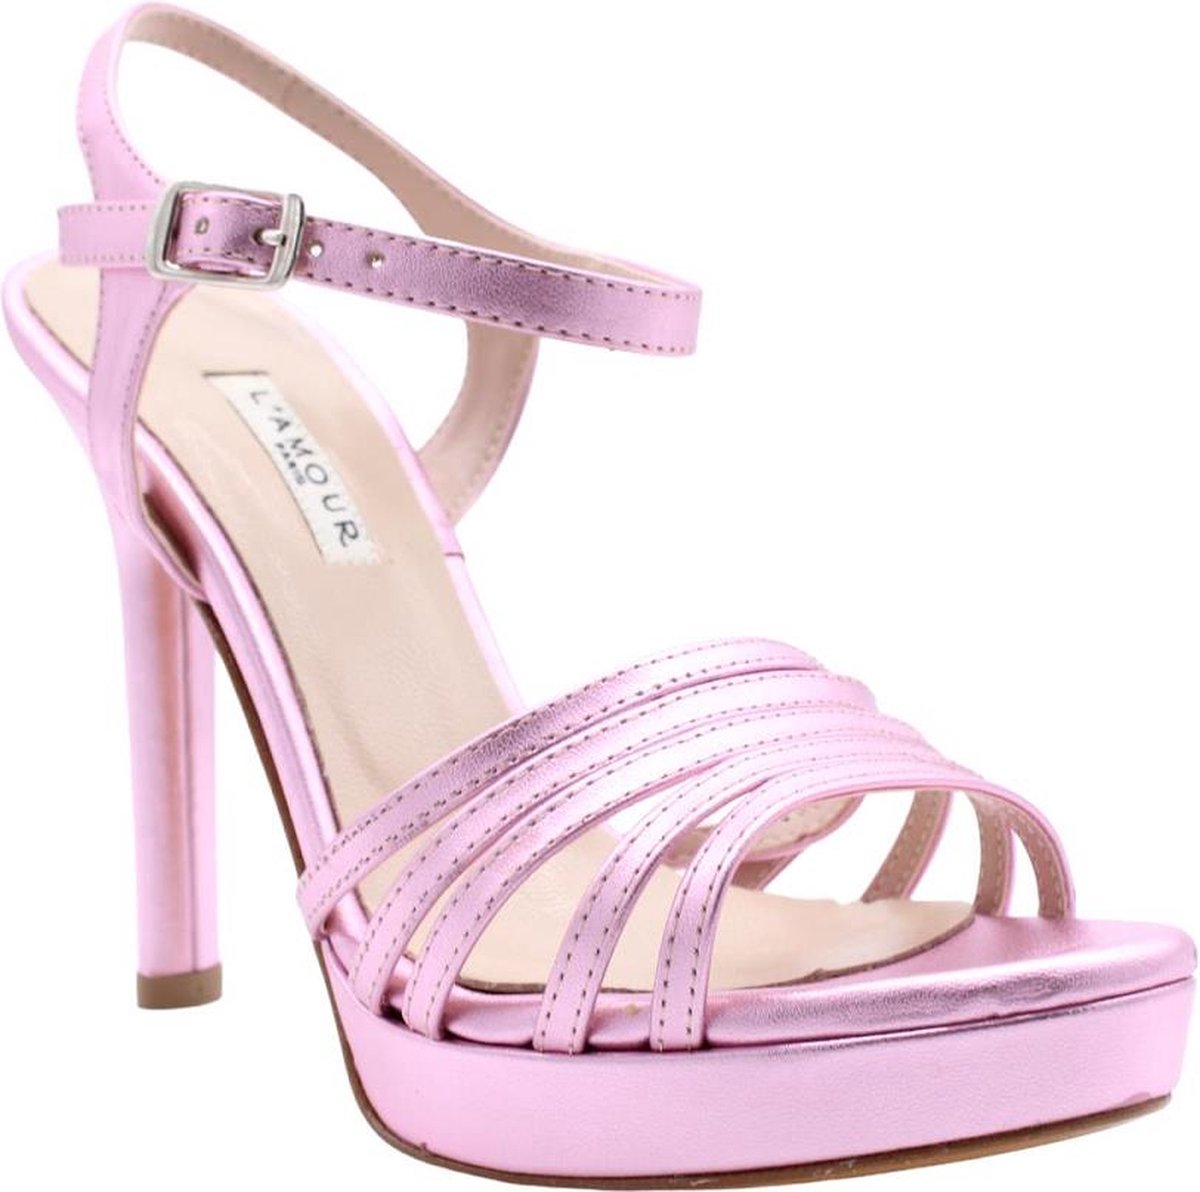 L'amour Sandaal Pink 36